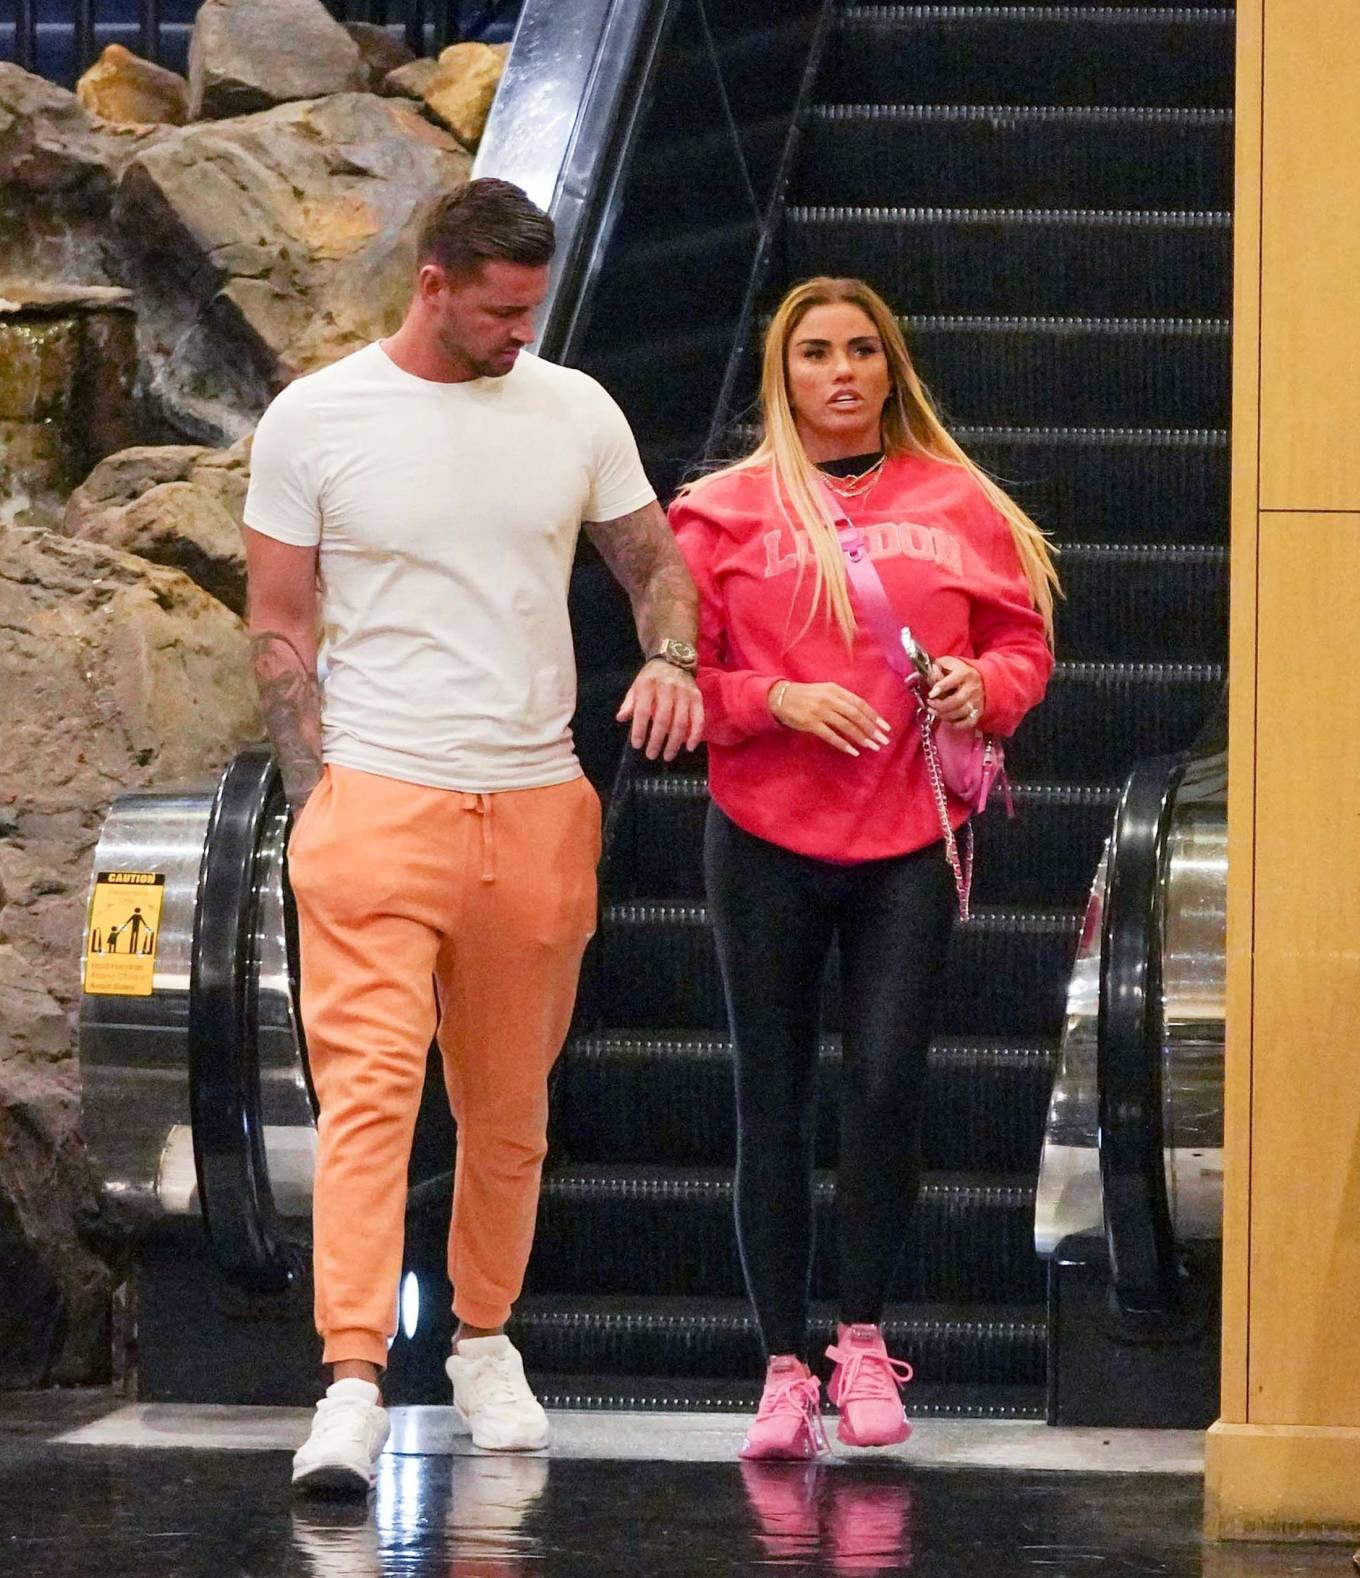 Katie Price - With fiance Carl Woods at REAL BODIES exhibition at Bally's in Las Vegas